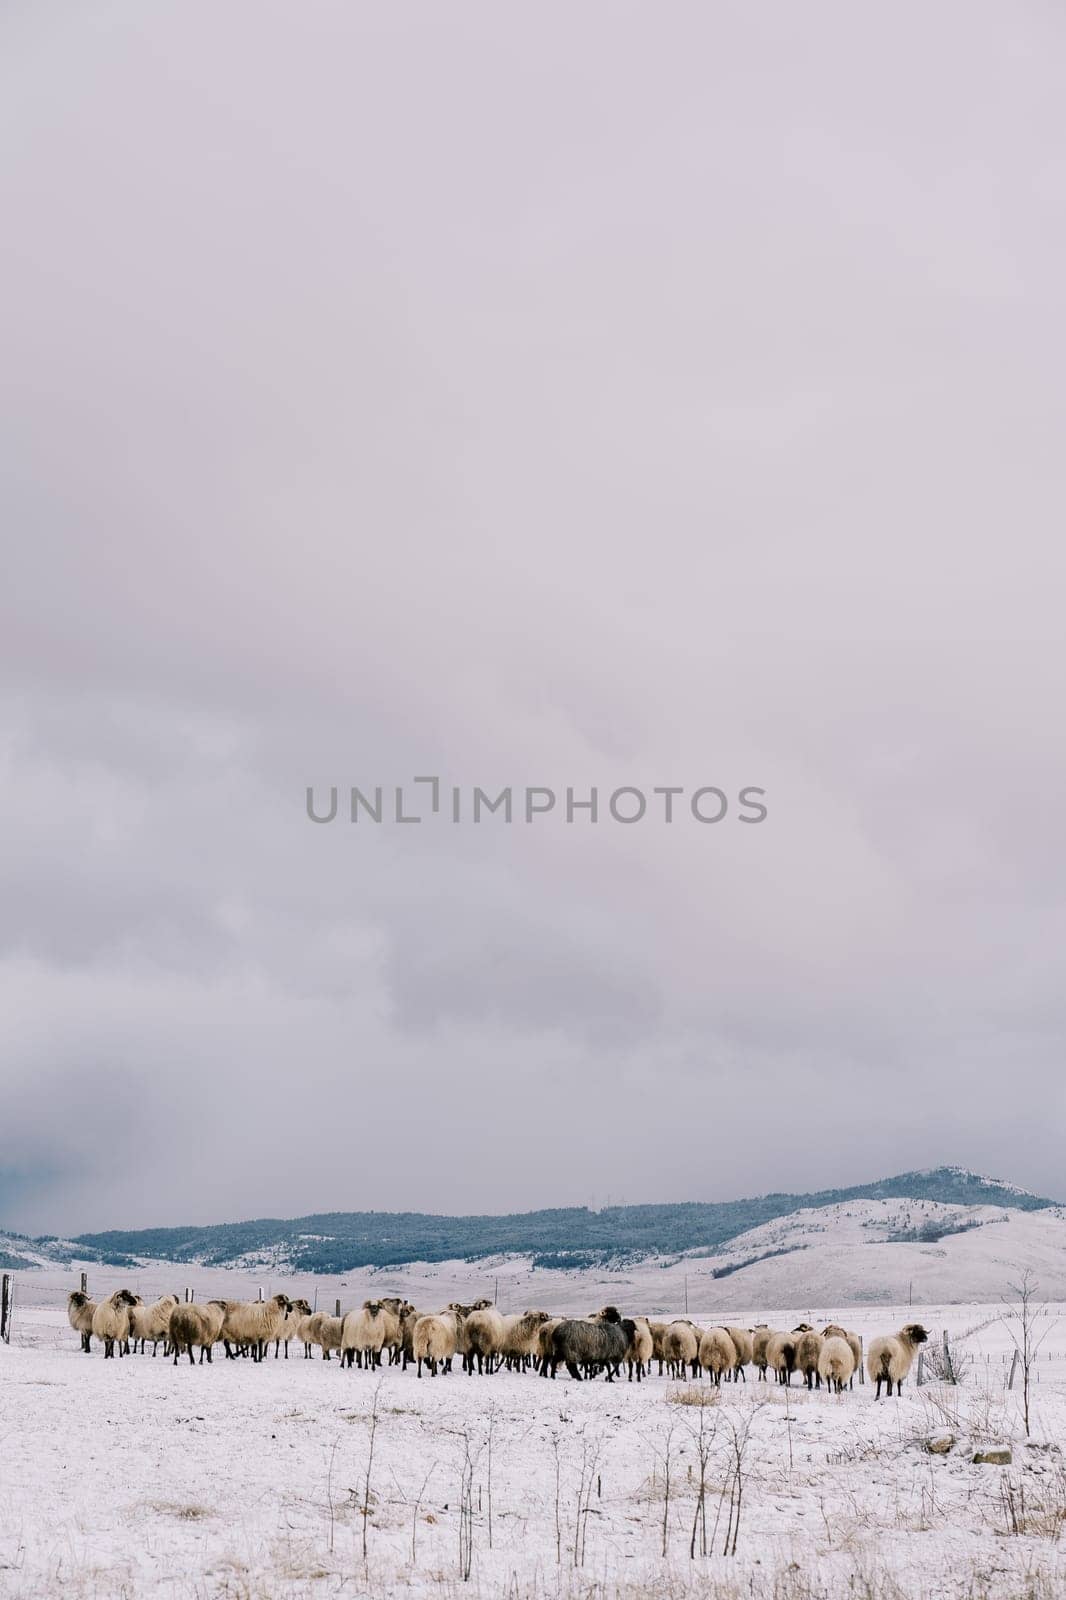 Herd of sheep walks through a snow-covered pasture in a mountain valley by Nadtochiy